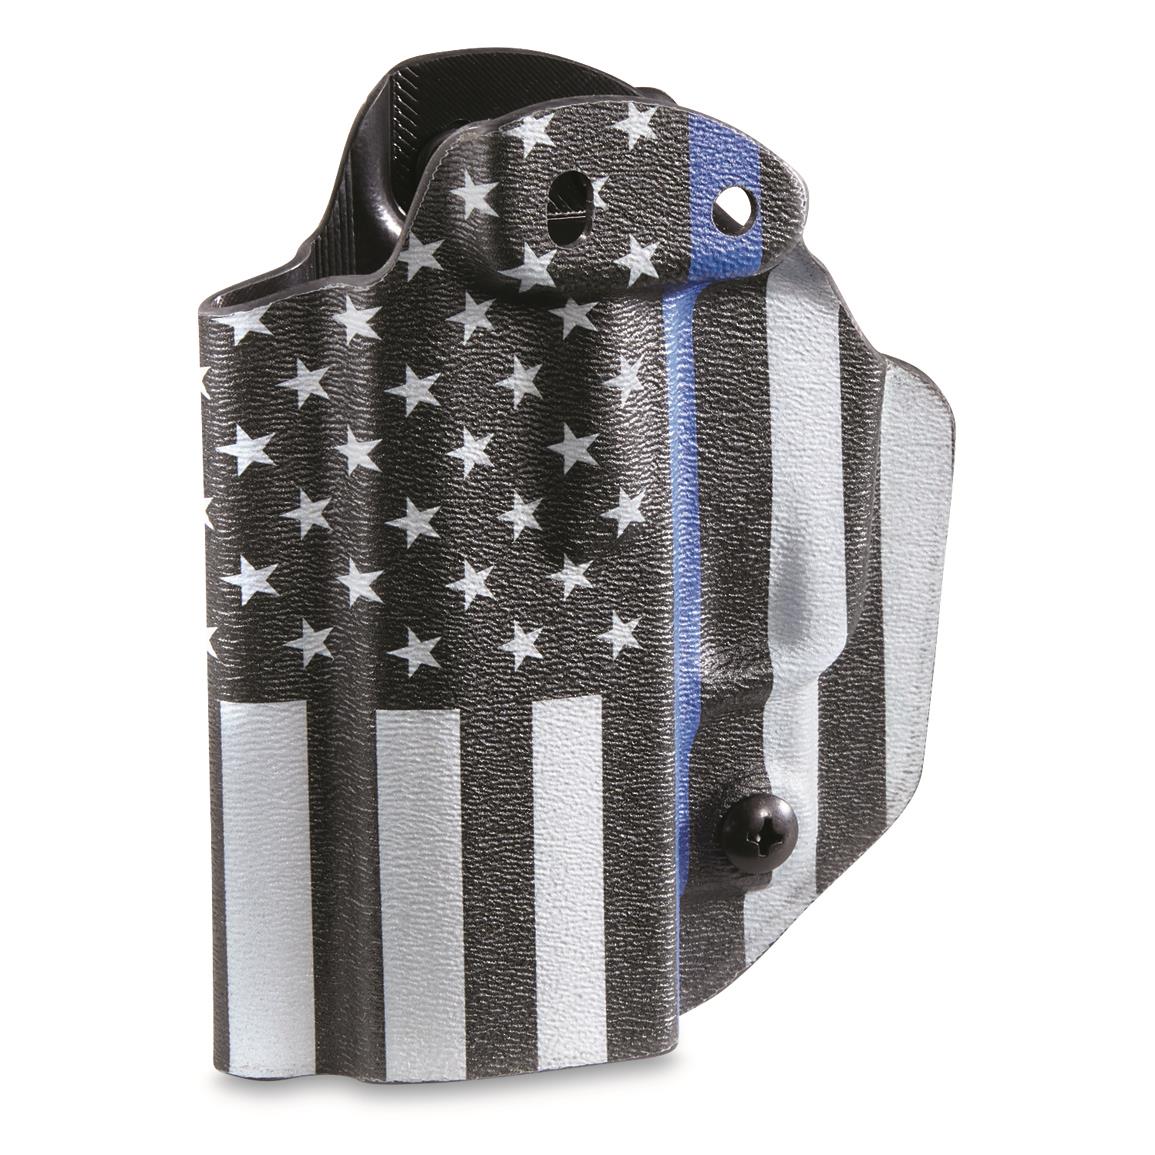 Mission First Tactical Ambidextrous Appendix IWB/OWB Holster, SIG SAUER P365, Thin Blue Line